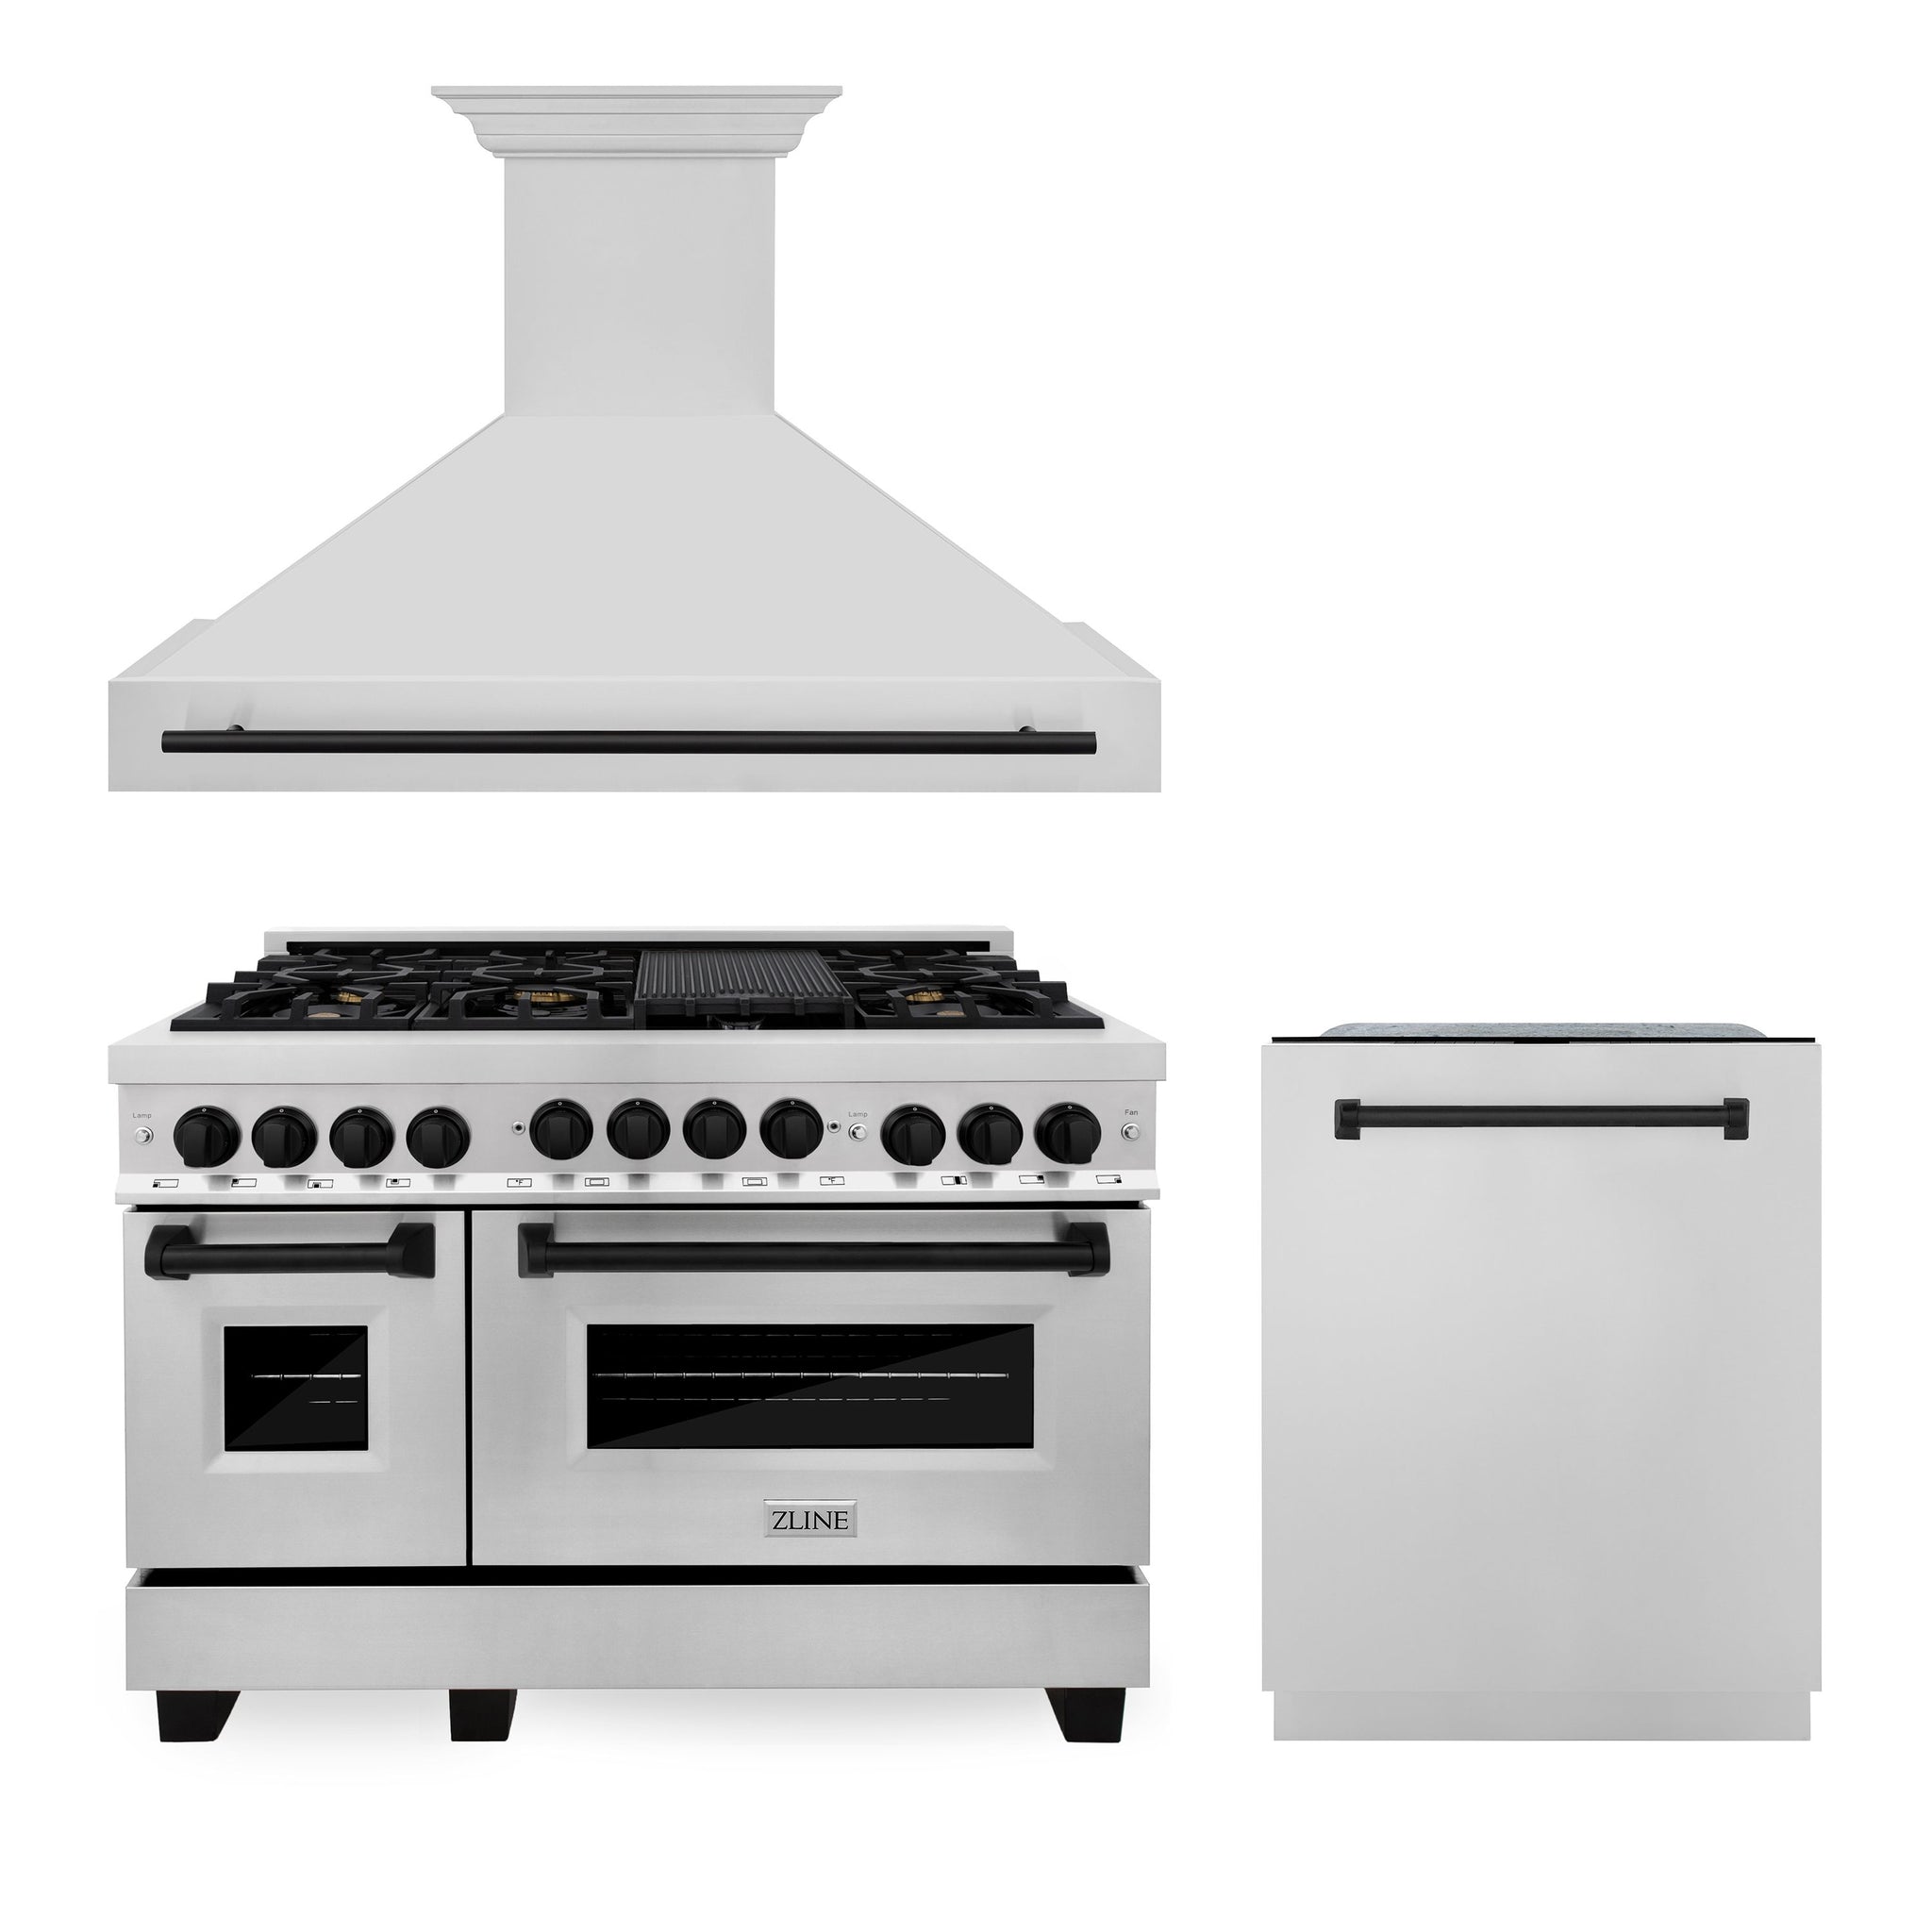 ZLINE Autograph Package - 48 In. Gas Range, Range Hood and Dishwasher in Stainless Steel with Matte Black Accents, 3AKPR-RGRH48-MB